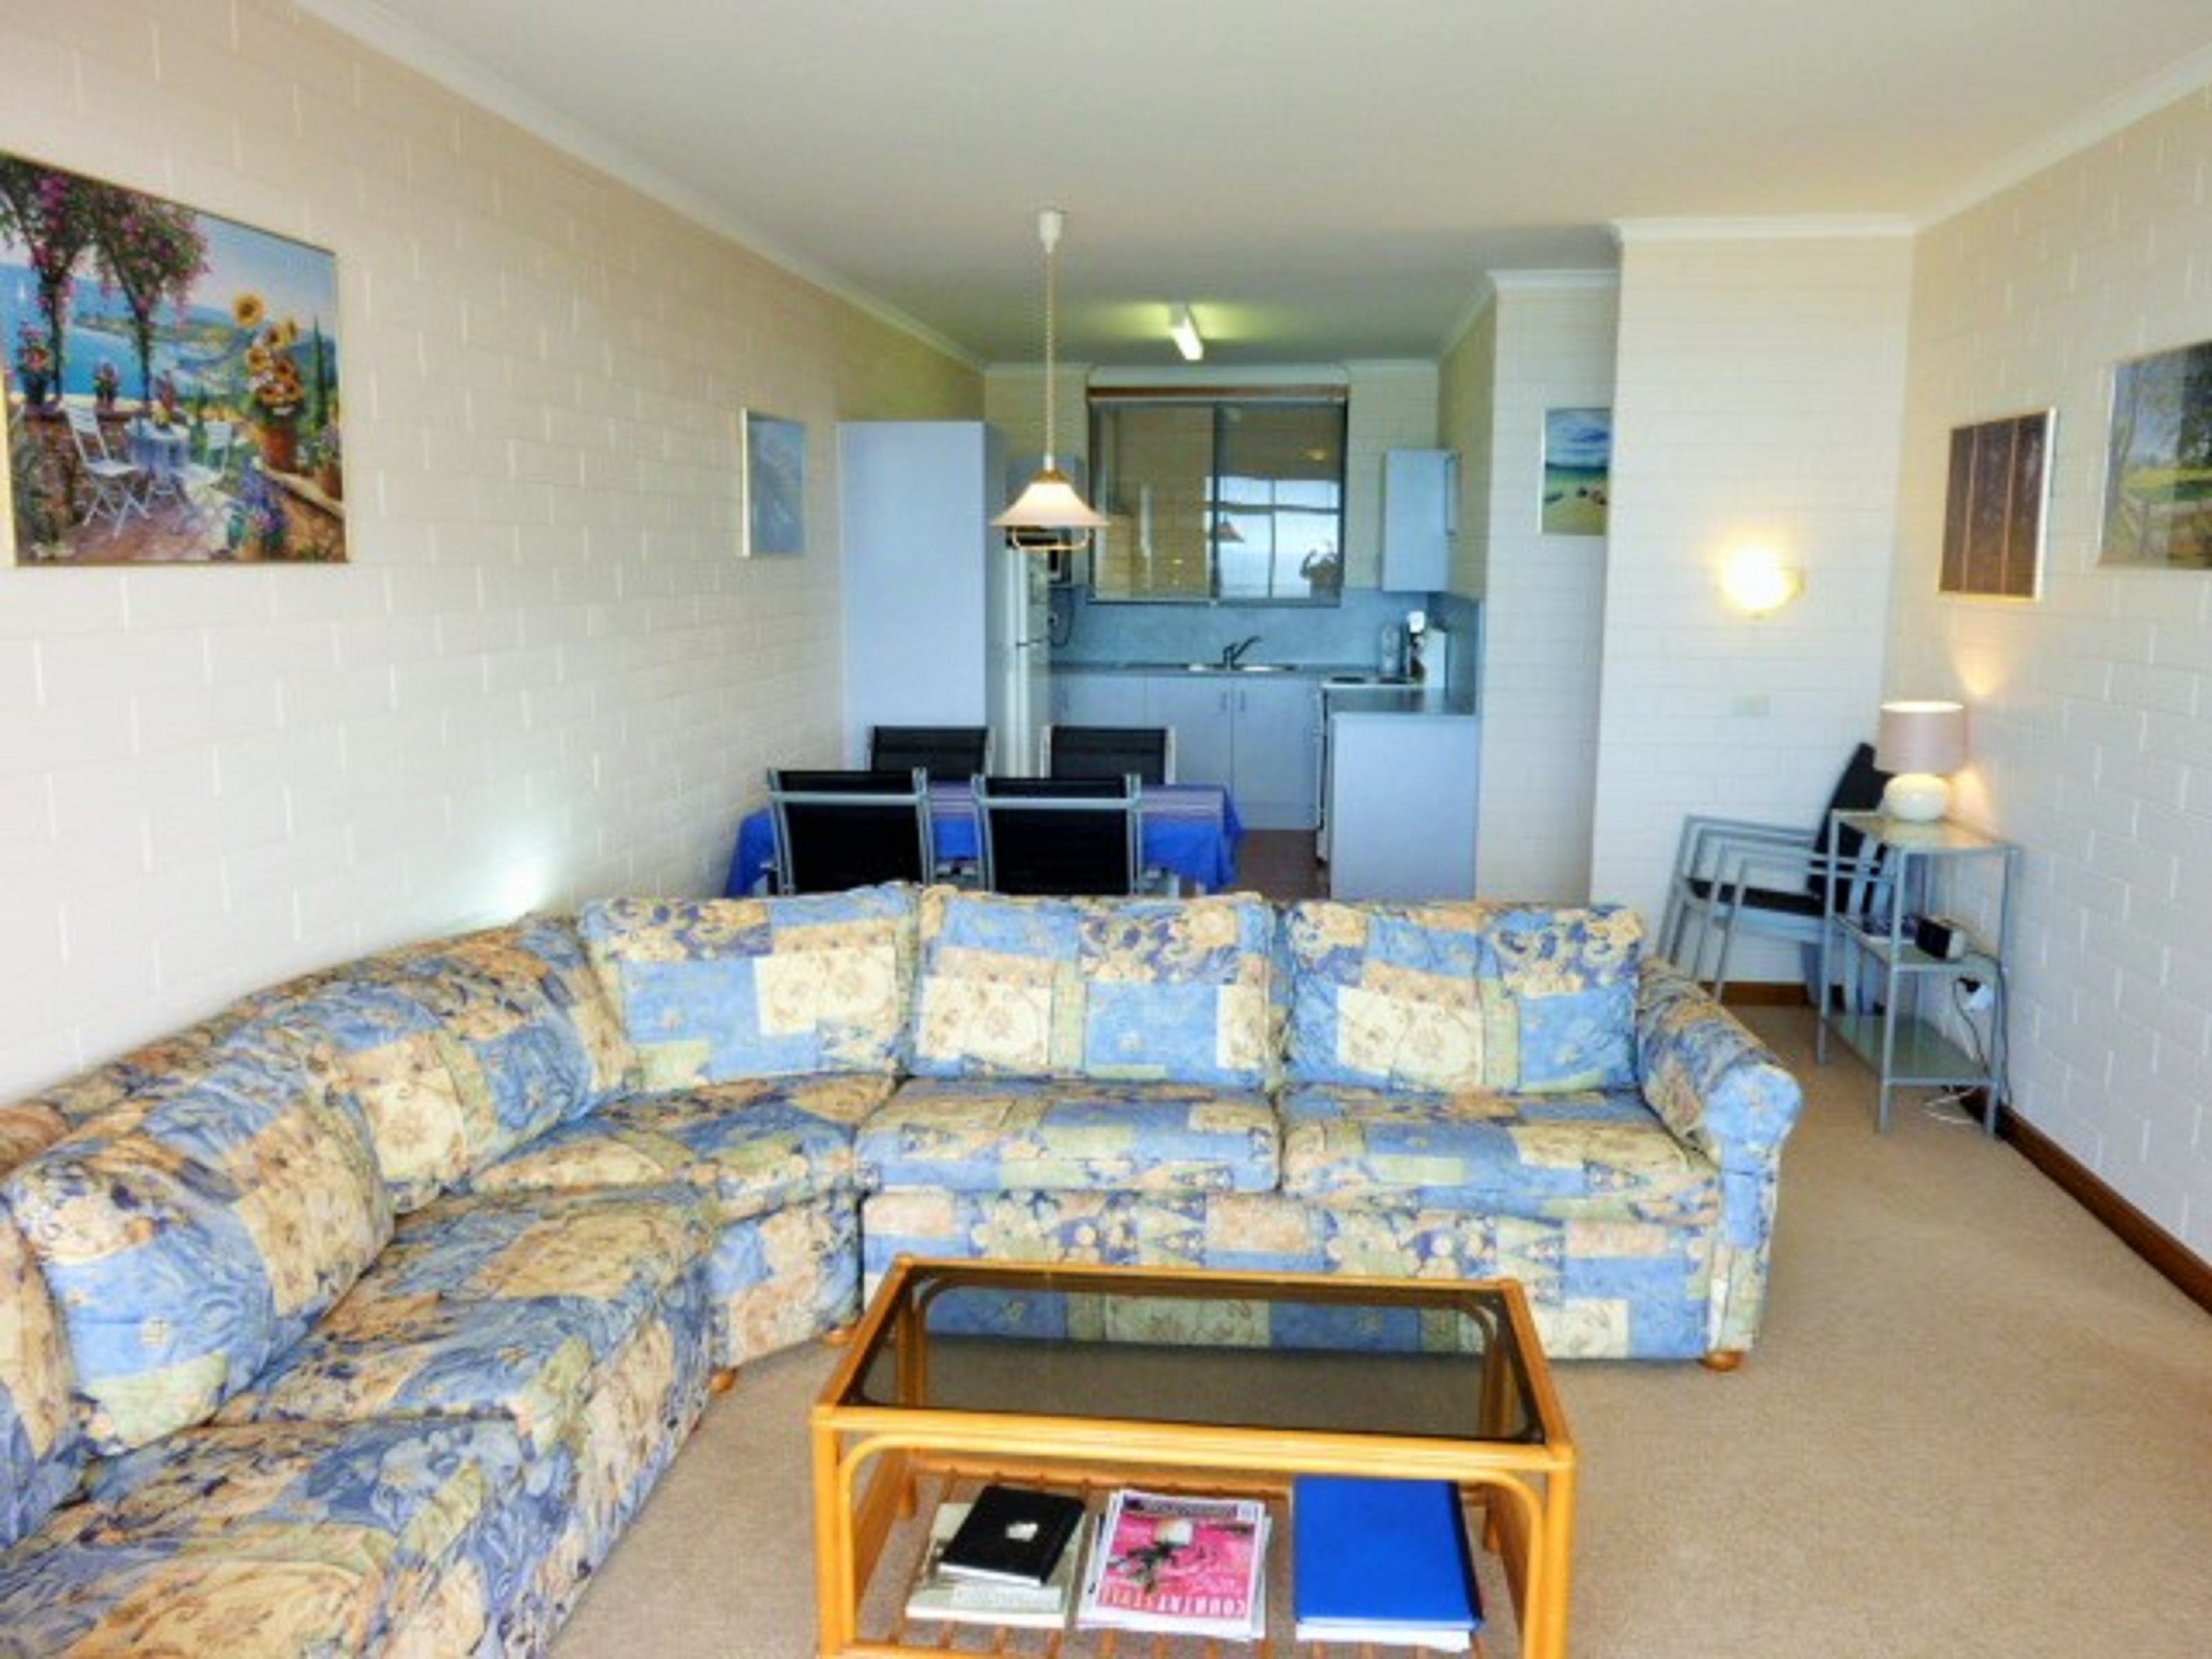 Dolphins 9 - Accommodation Bookings 1